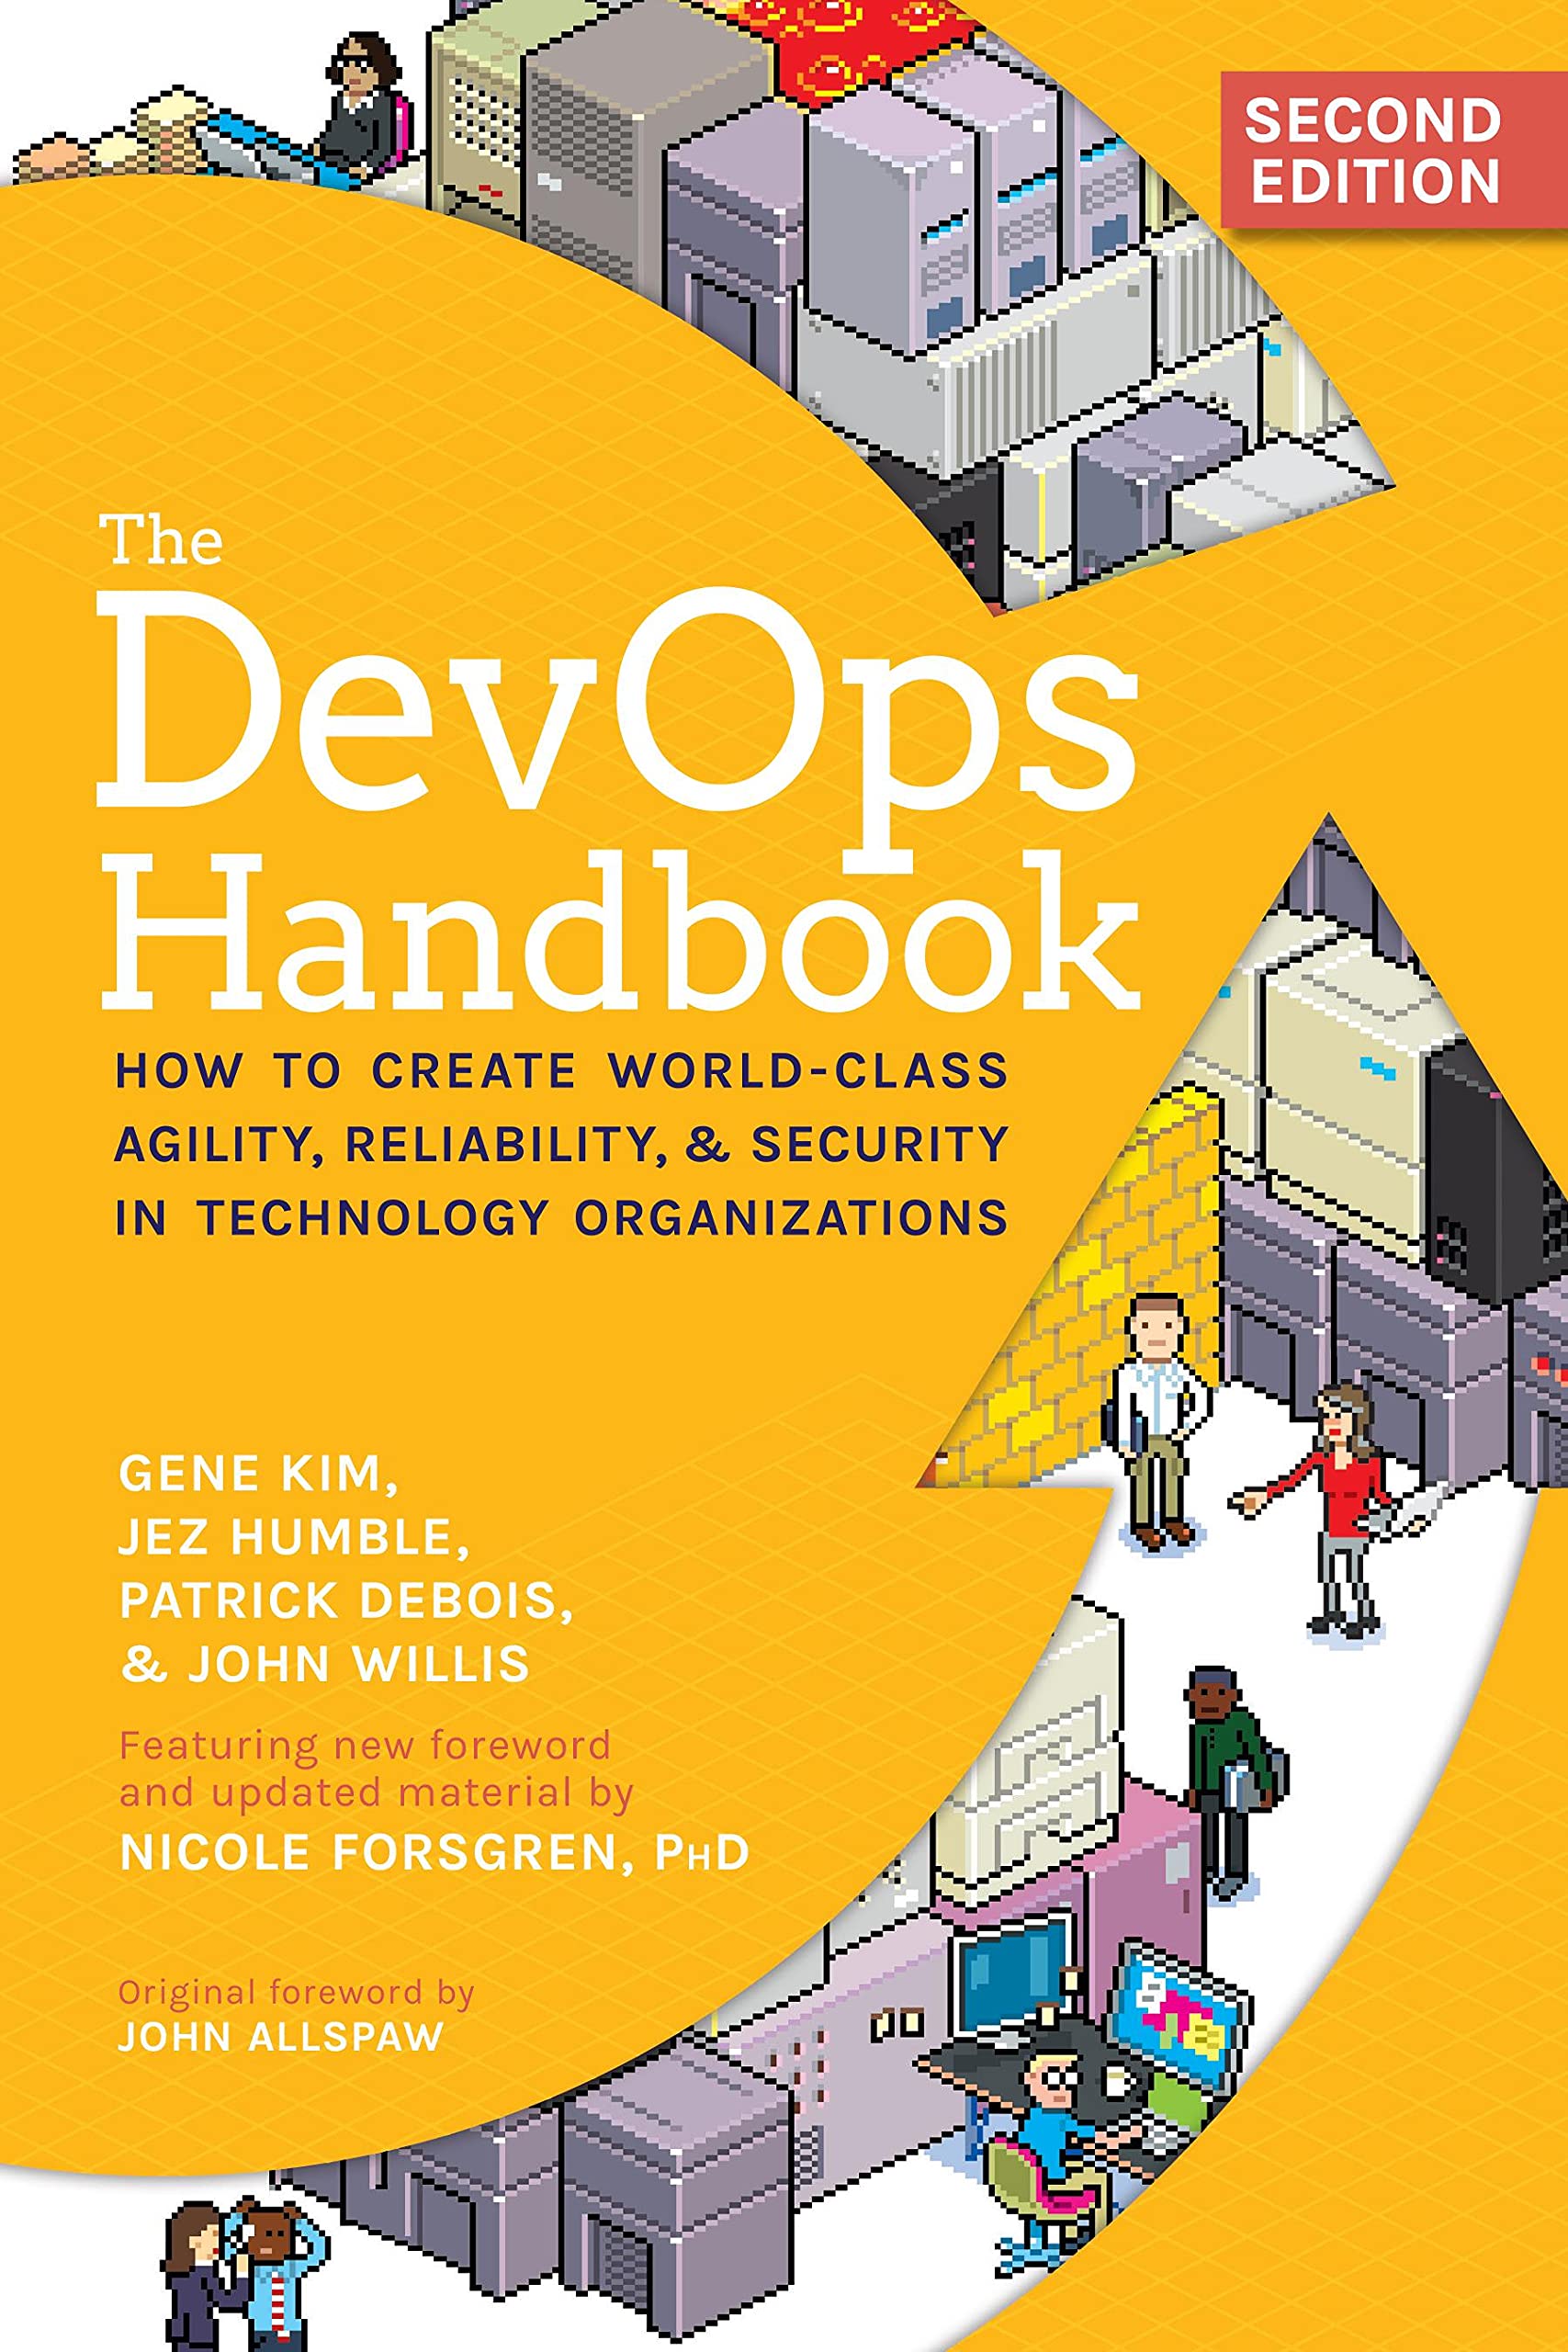 The DevOps Handbook by Humble and Kim